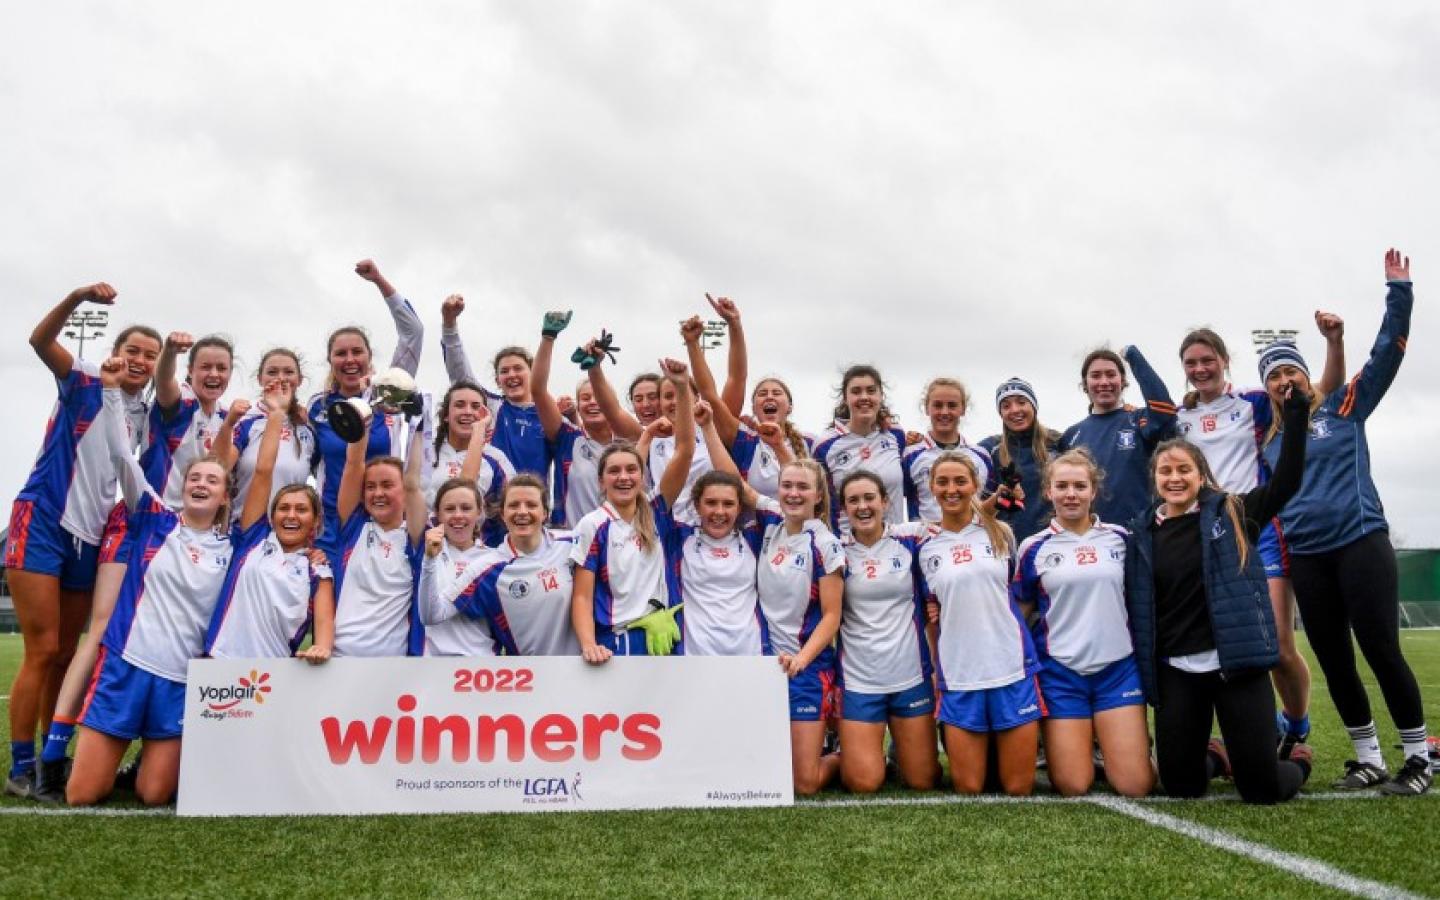 The MIC ladies football team are pictured celebrating. They are dressed in MIC branded football kit and there is a sign that says '2022 Winners'